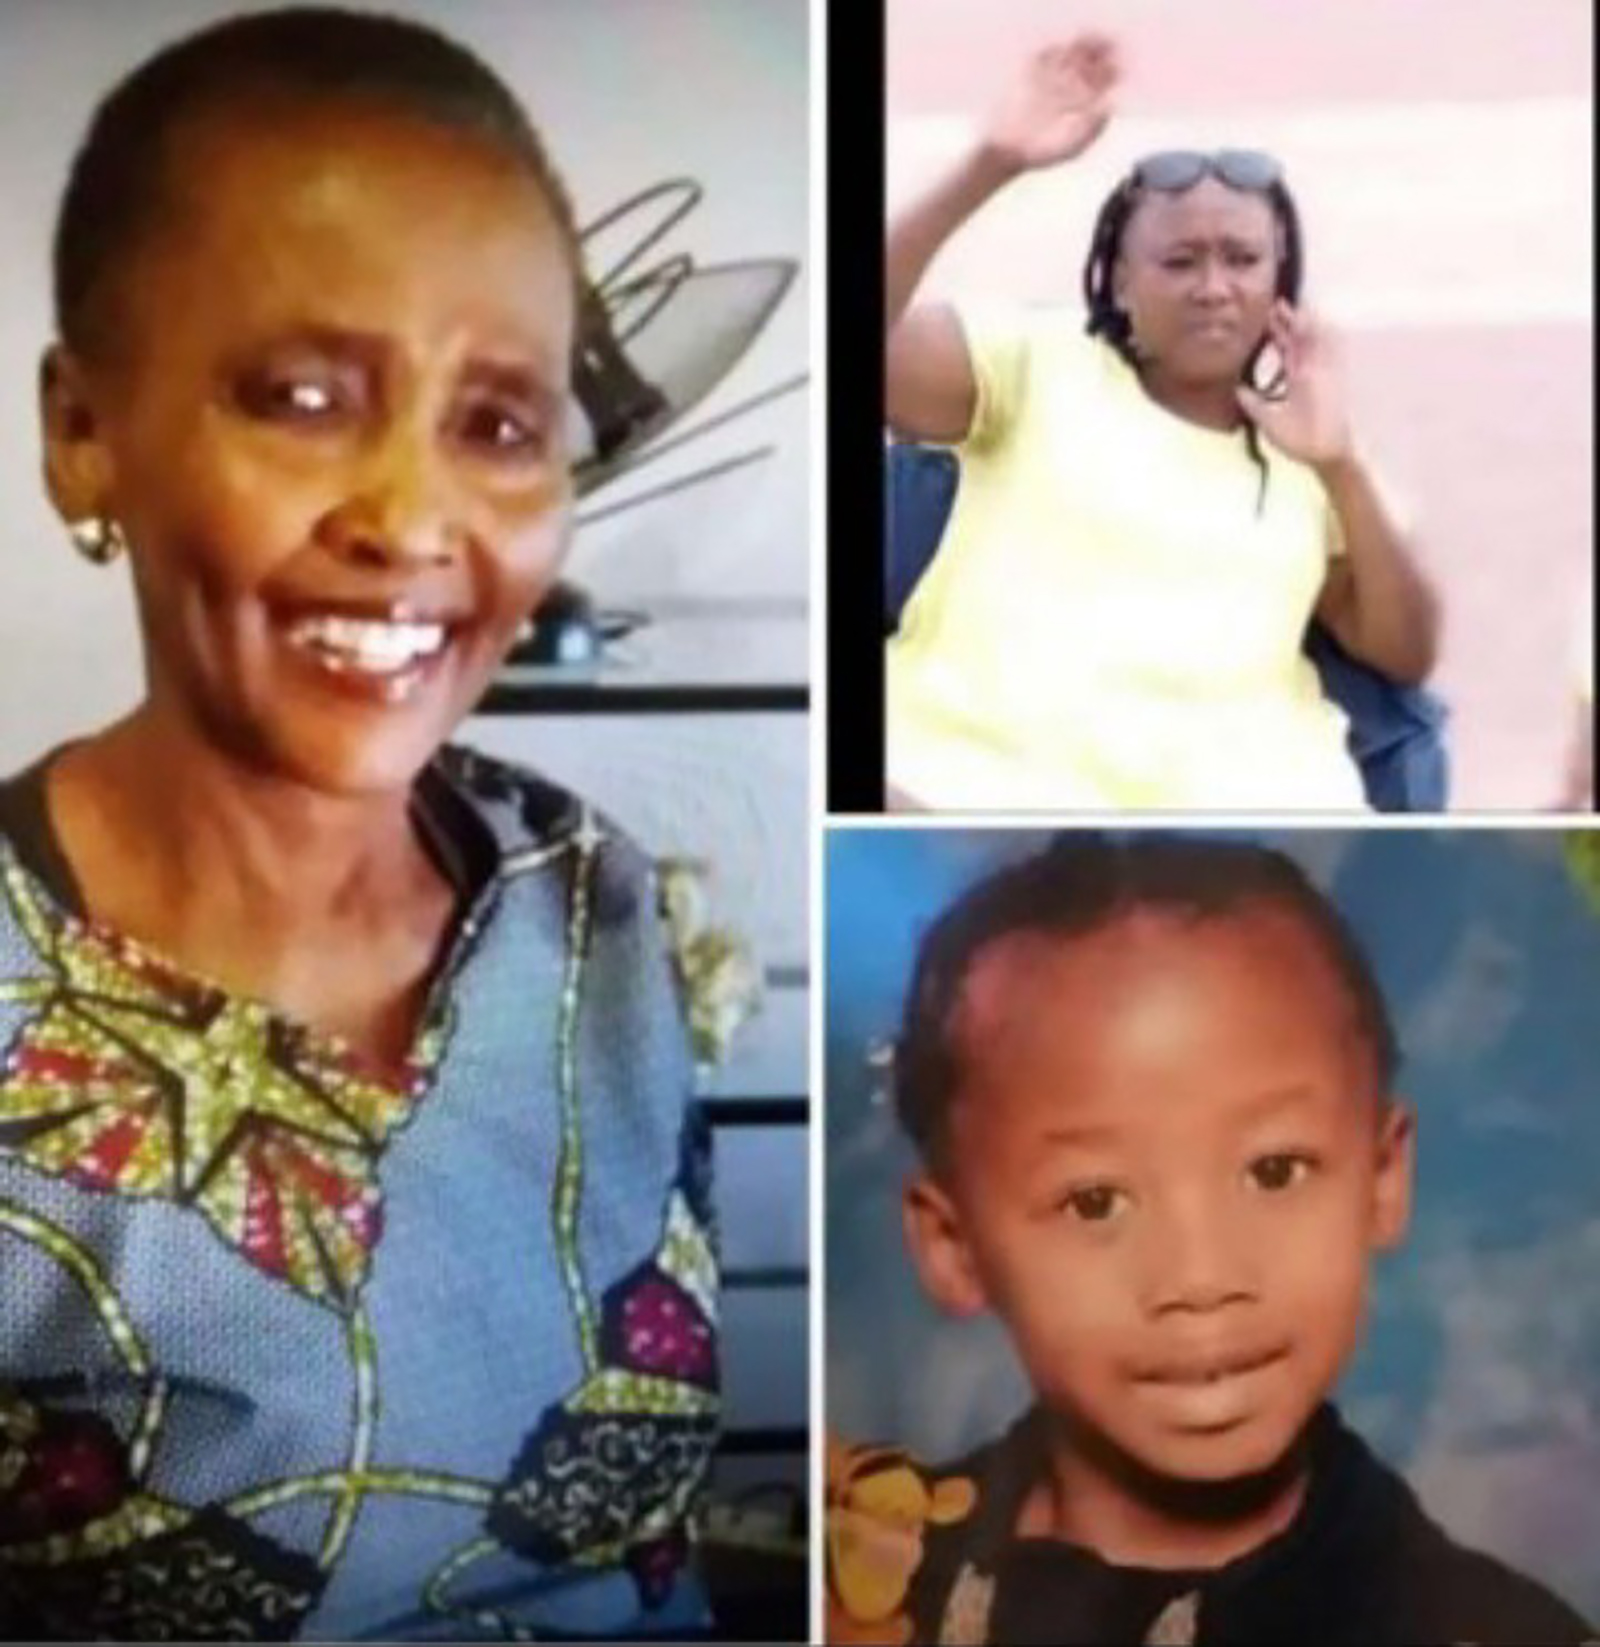 RIP: Grandmother, mother and daughter were sadly killed in their home cruelly 1